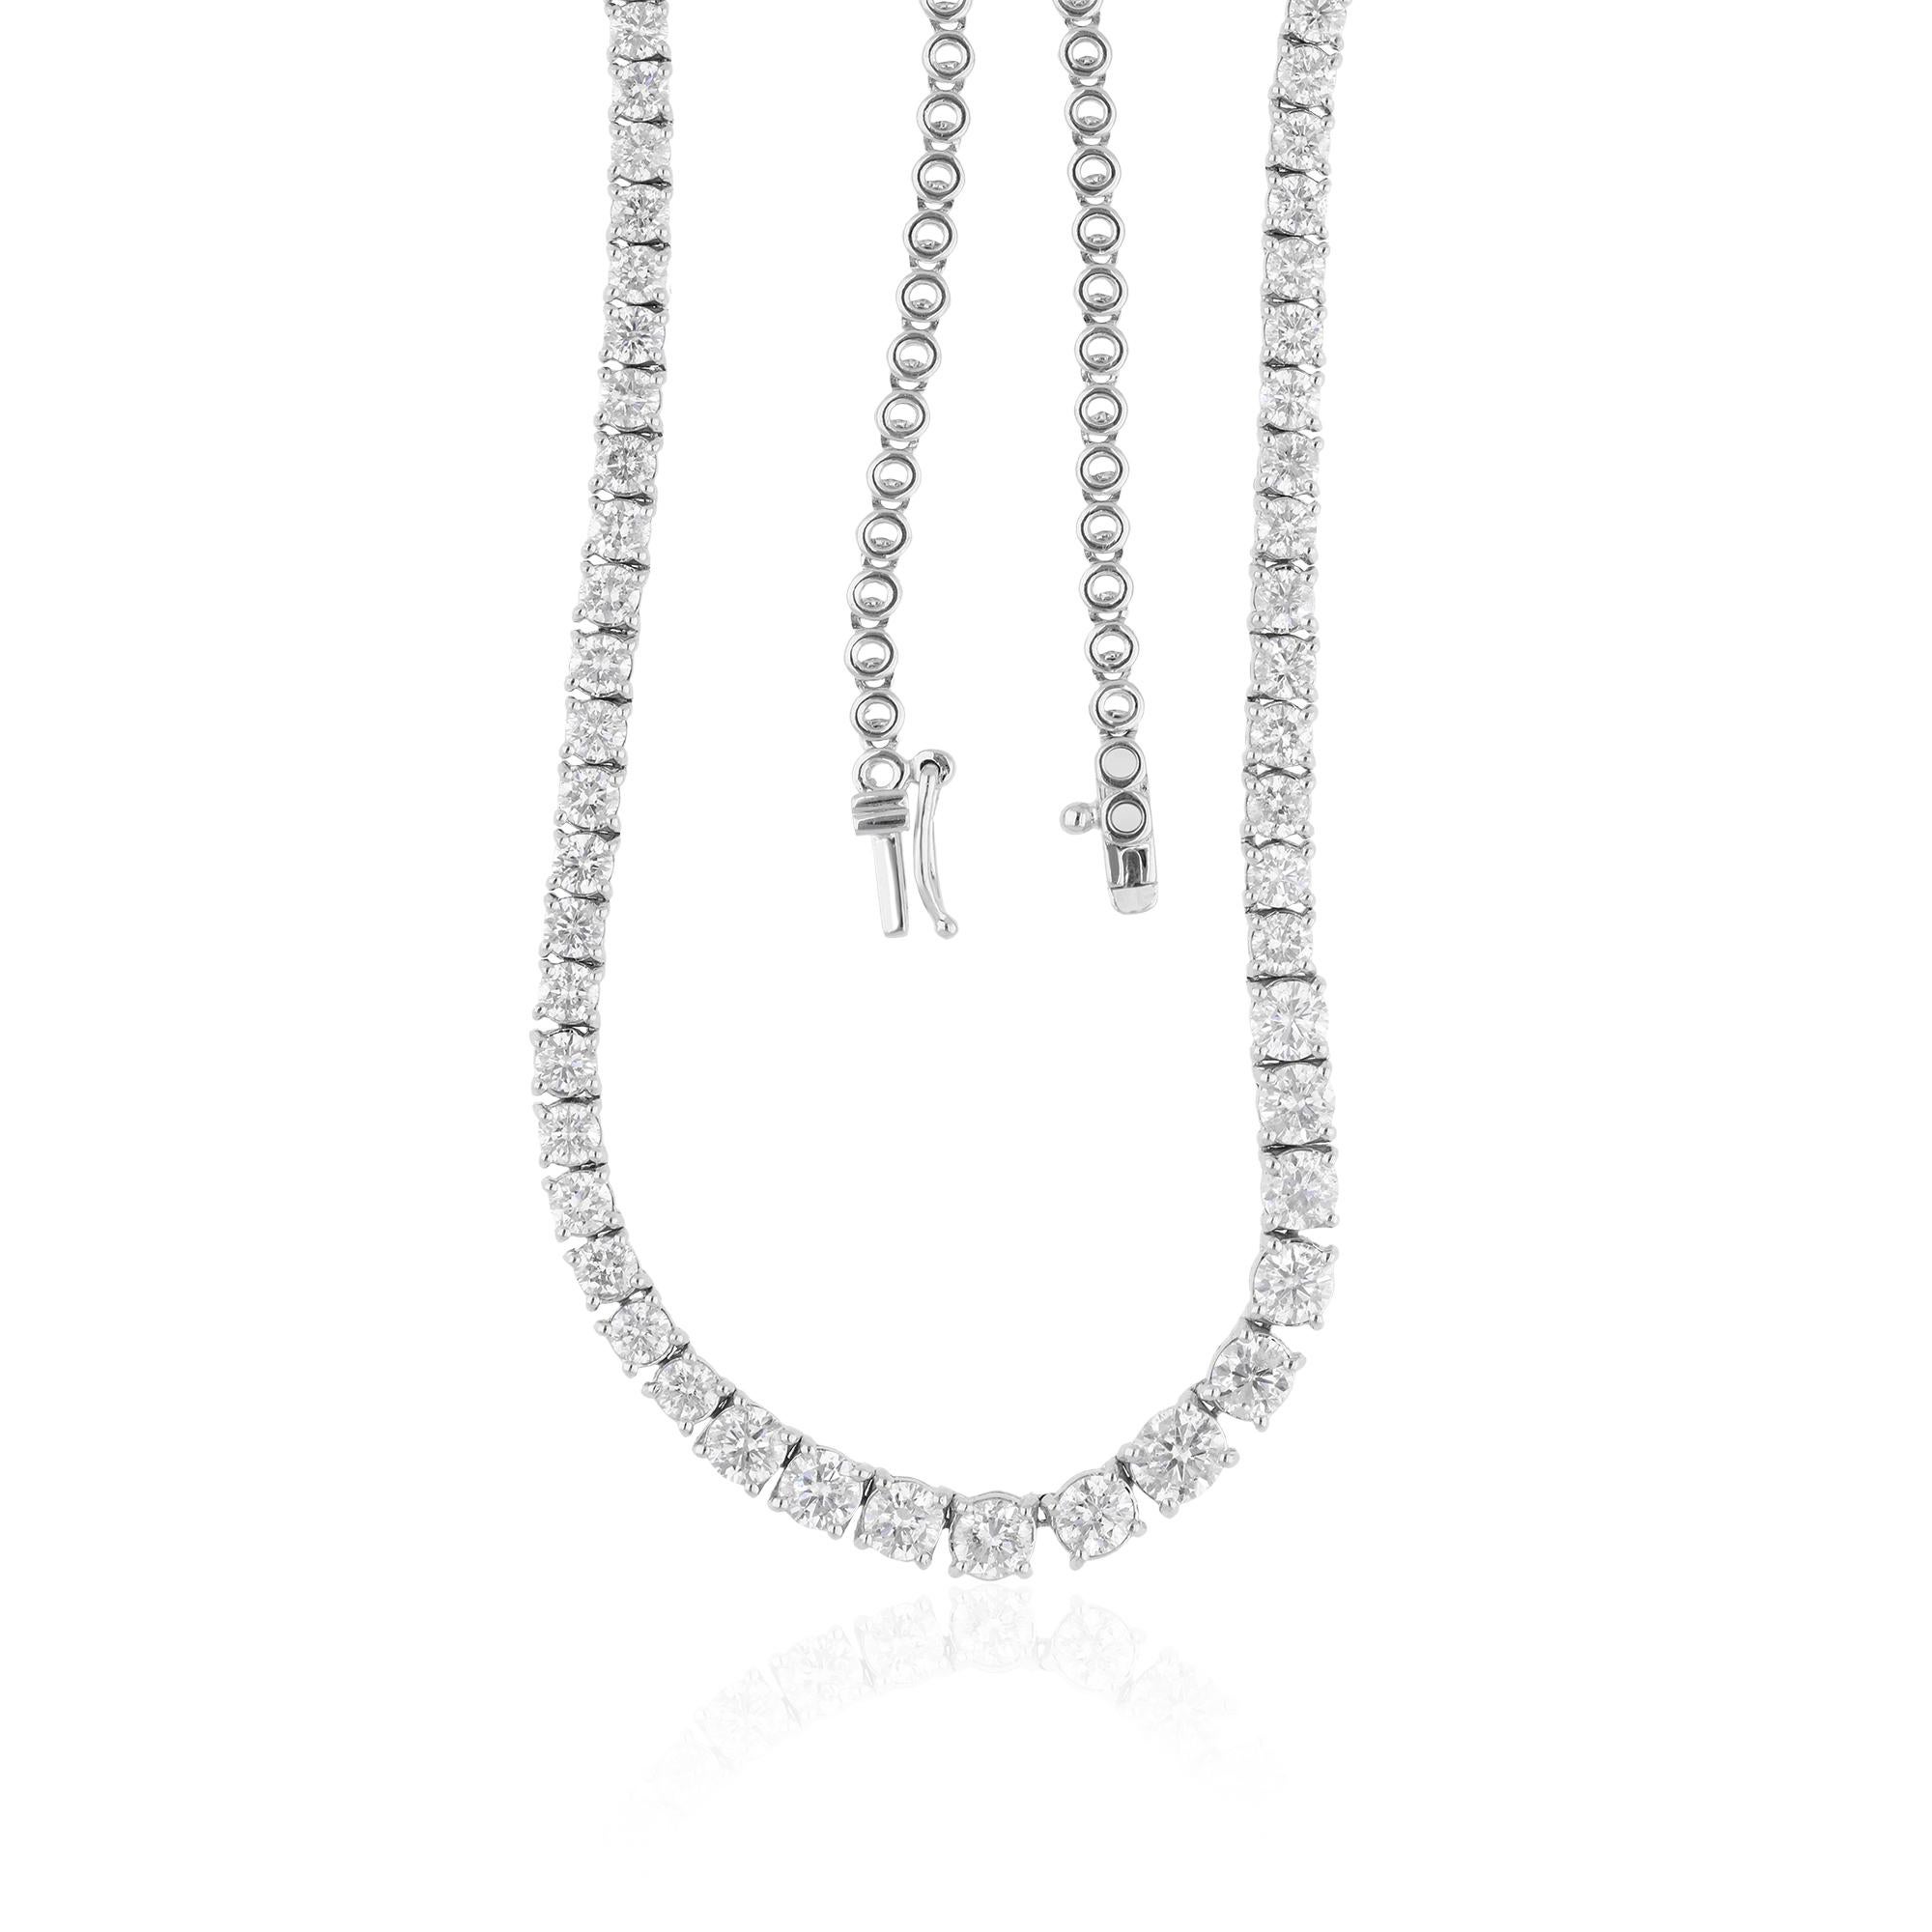 Modern Real 7.18 Carat SI Clarity HI Color Diamond Chain Necklace 14 Karat White Gold For Sale